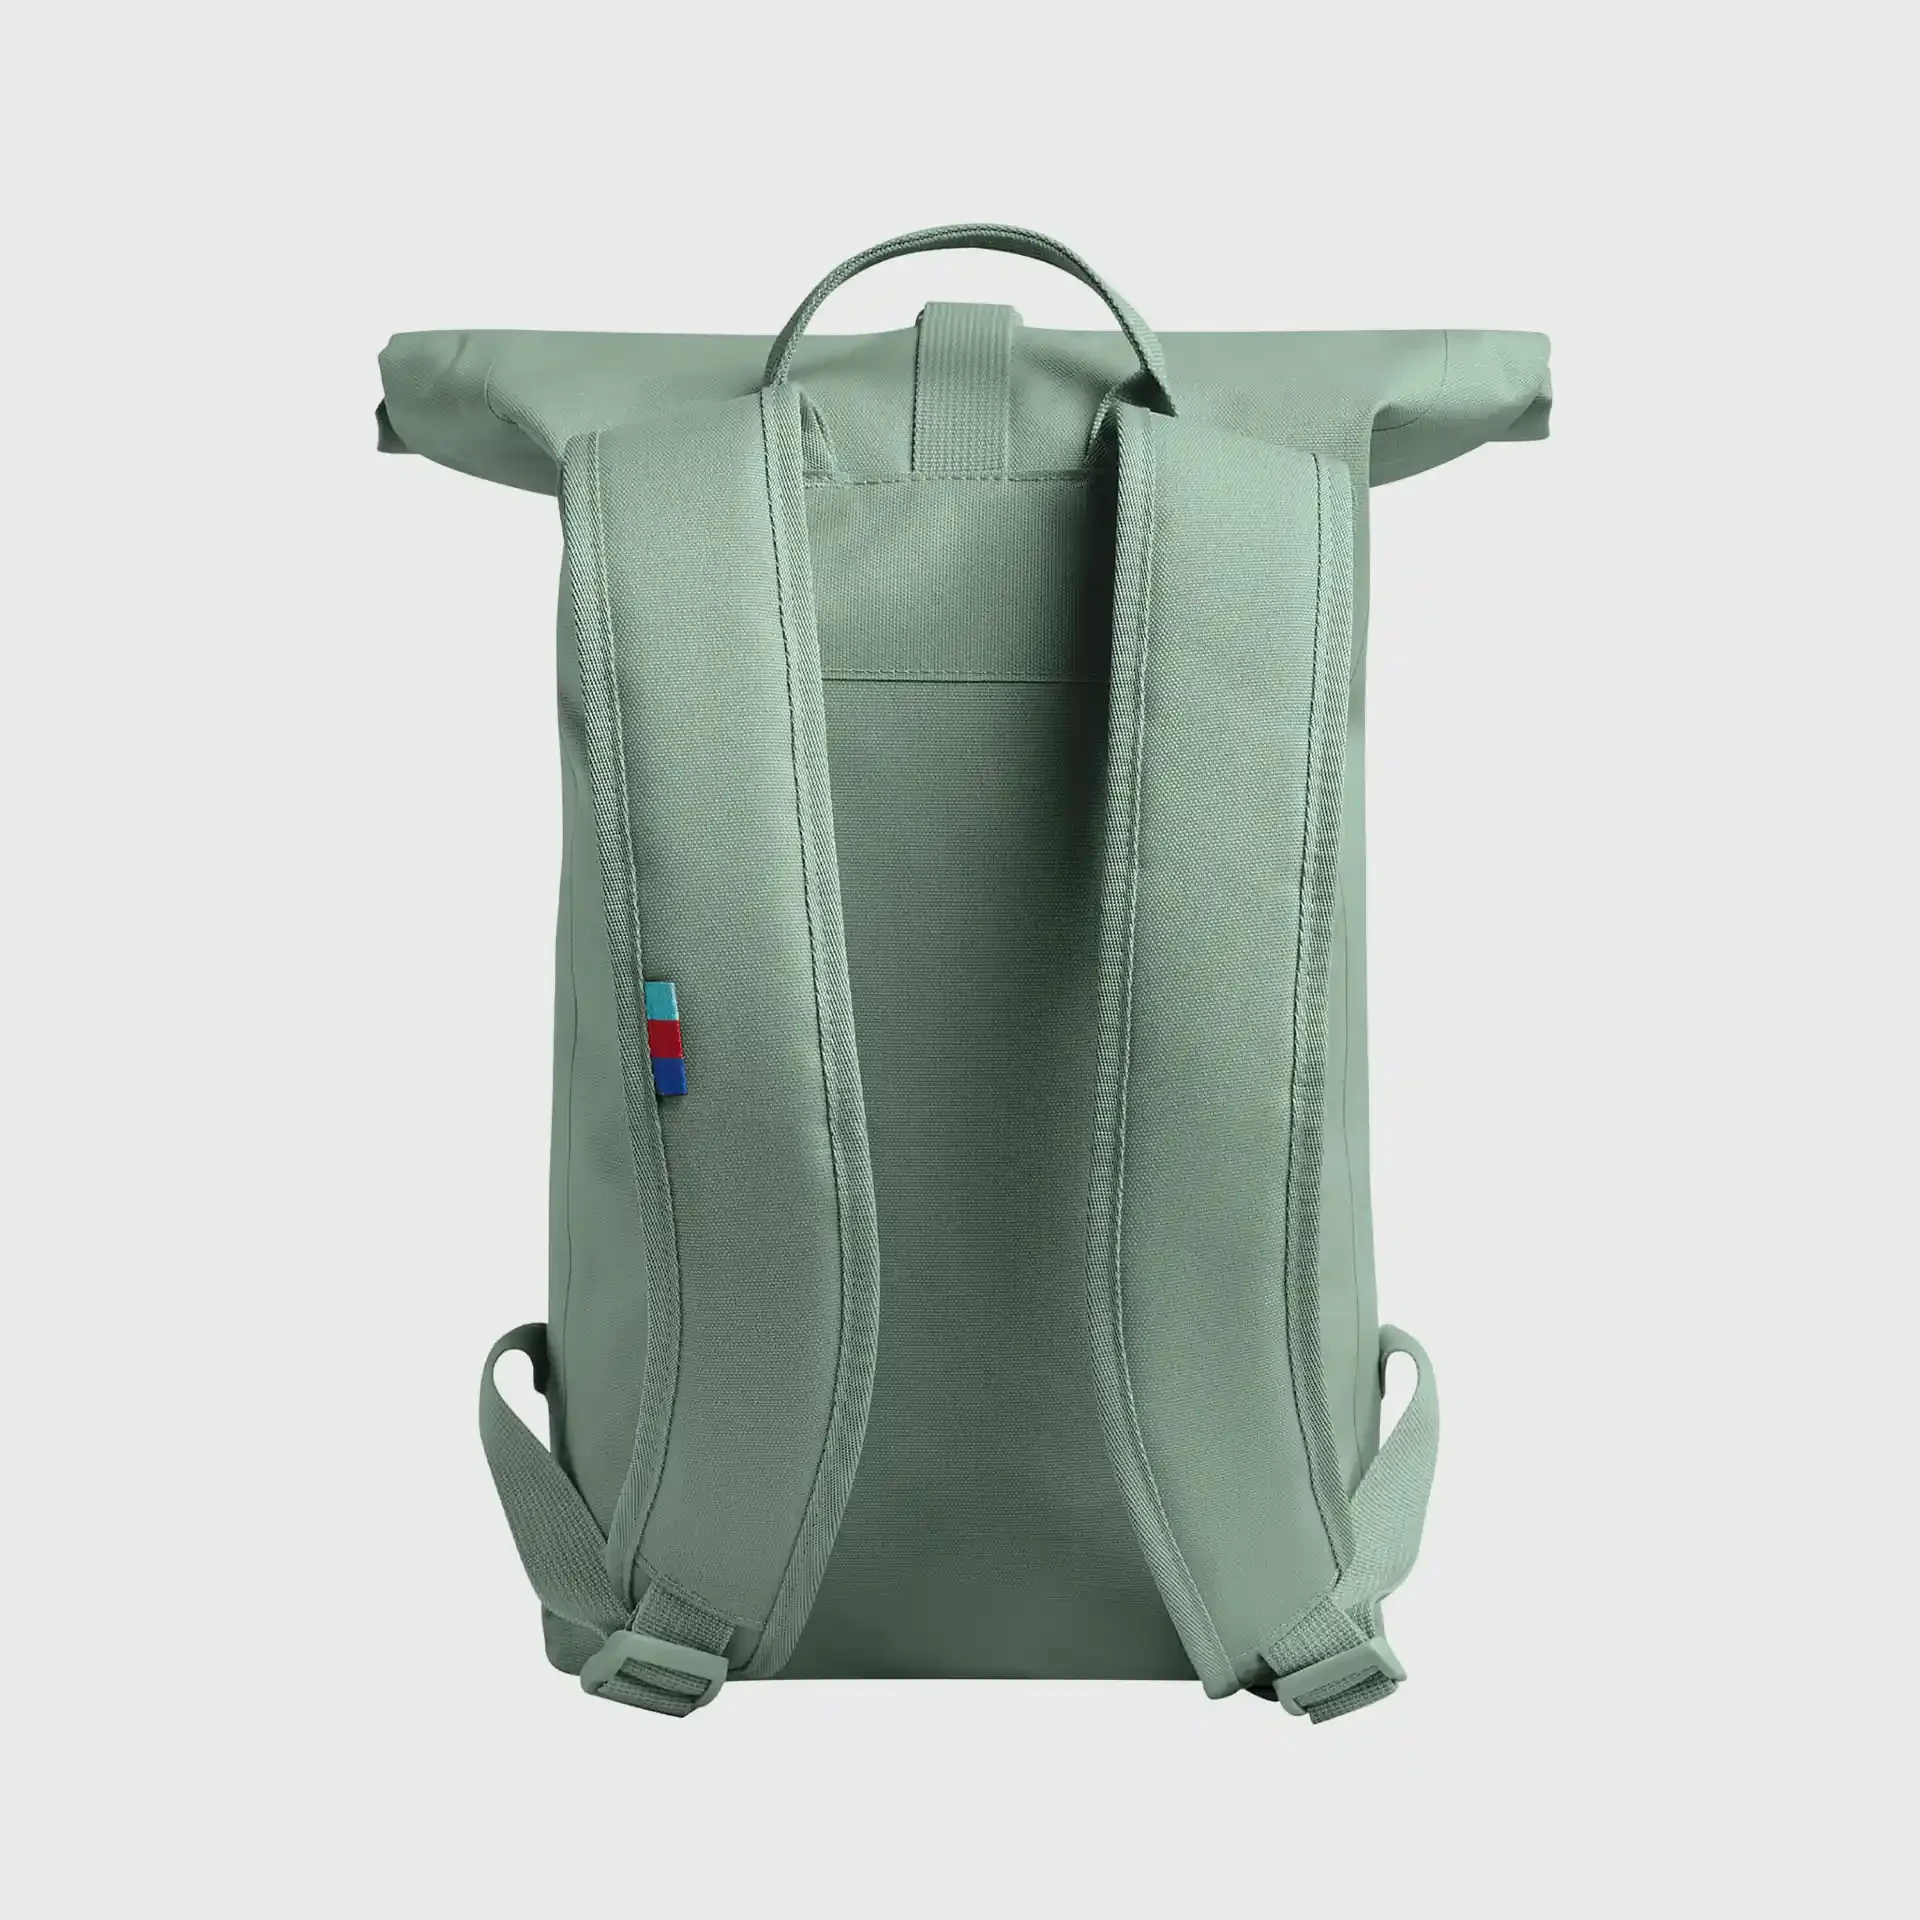 Got Bag Rolltop Small Backpack Reef